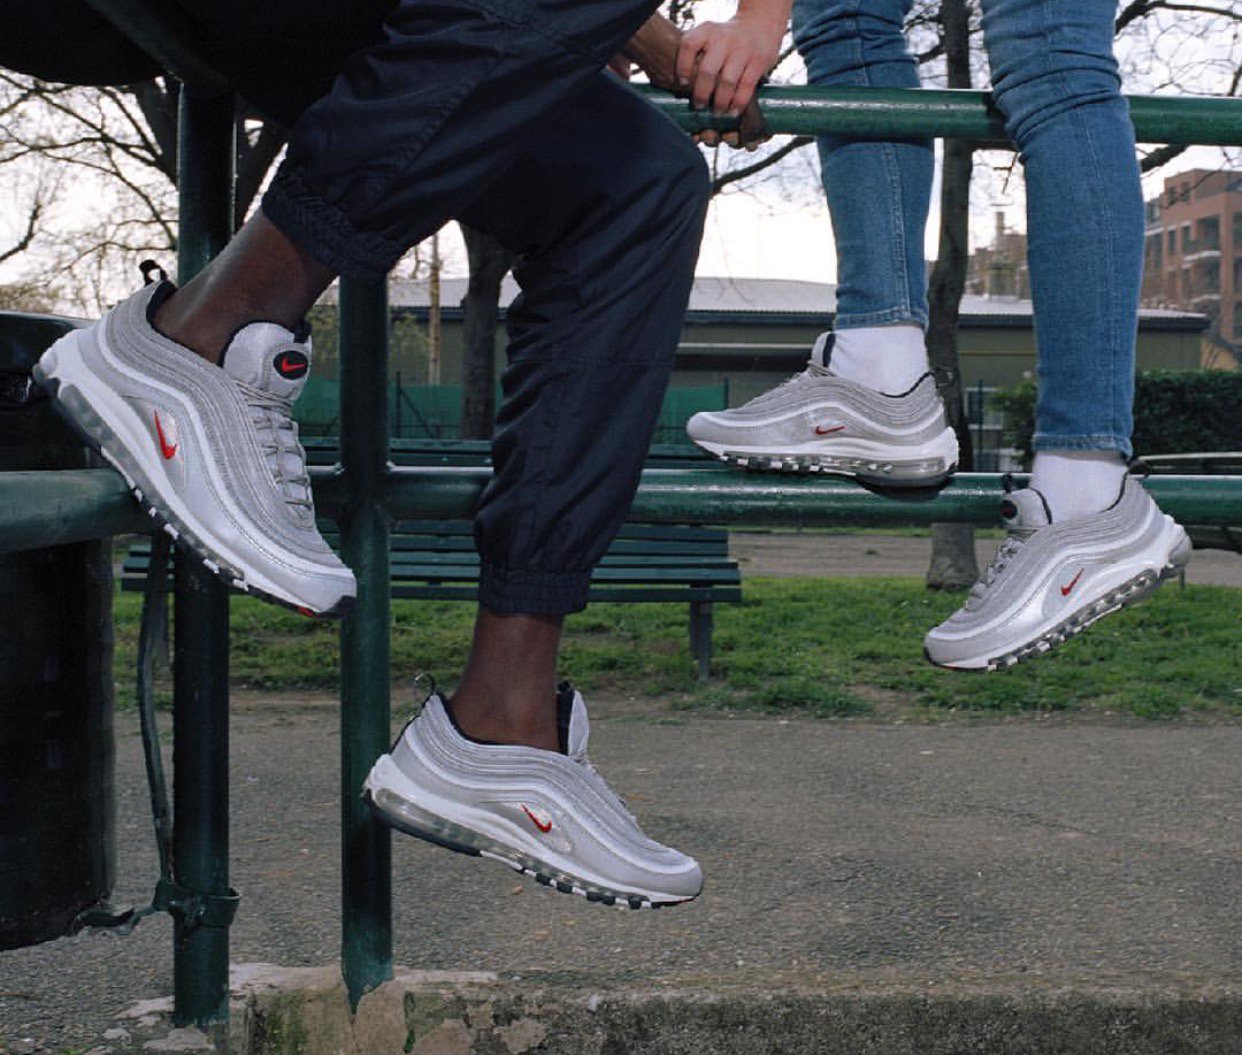 Foot Locker Canada on Twitter: "The Nike Air Max 97 Silver Bullet is now available in men's and ladies in select stores and online here: https://t.co/pOjqZyOTih https://t.co/SHnPsbrusF" / Twitter